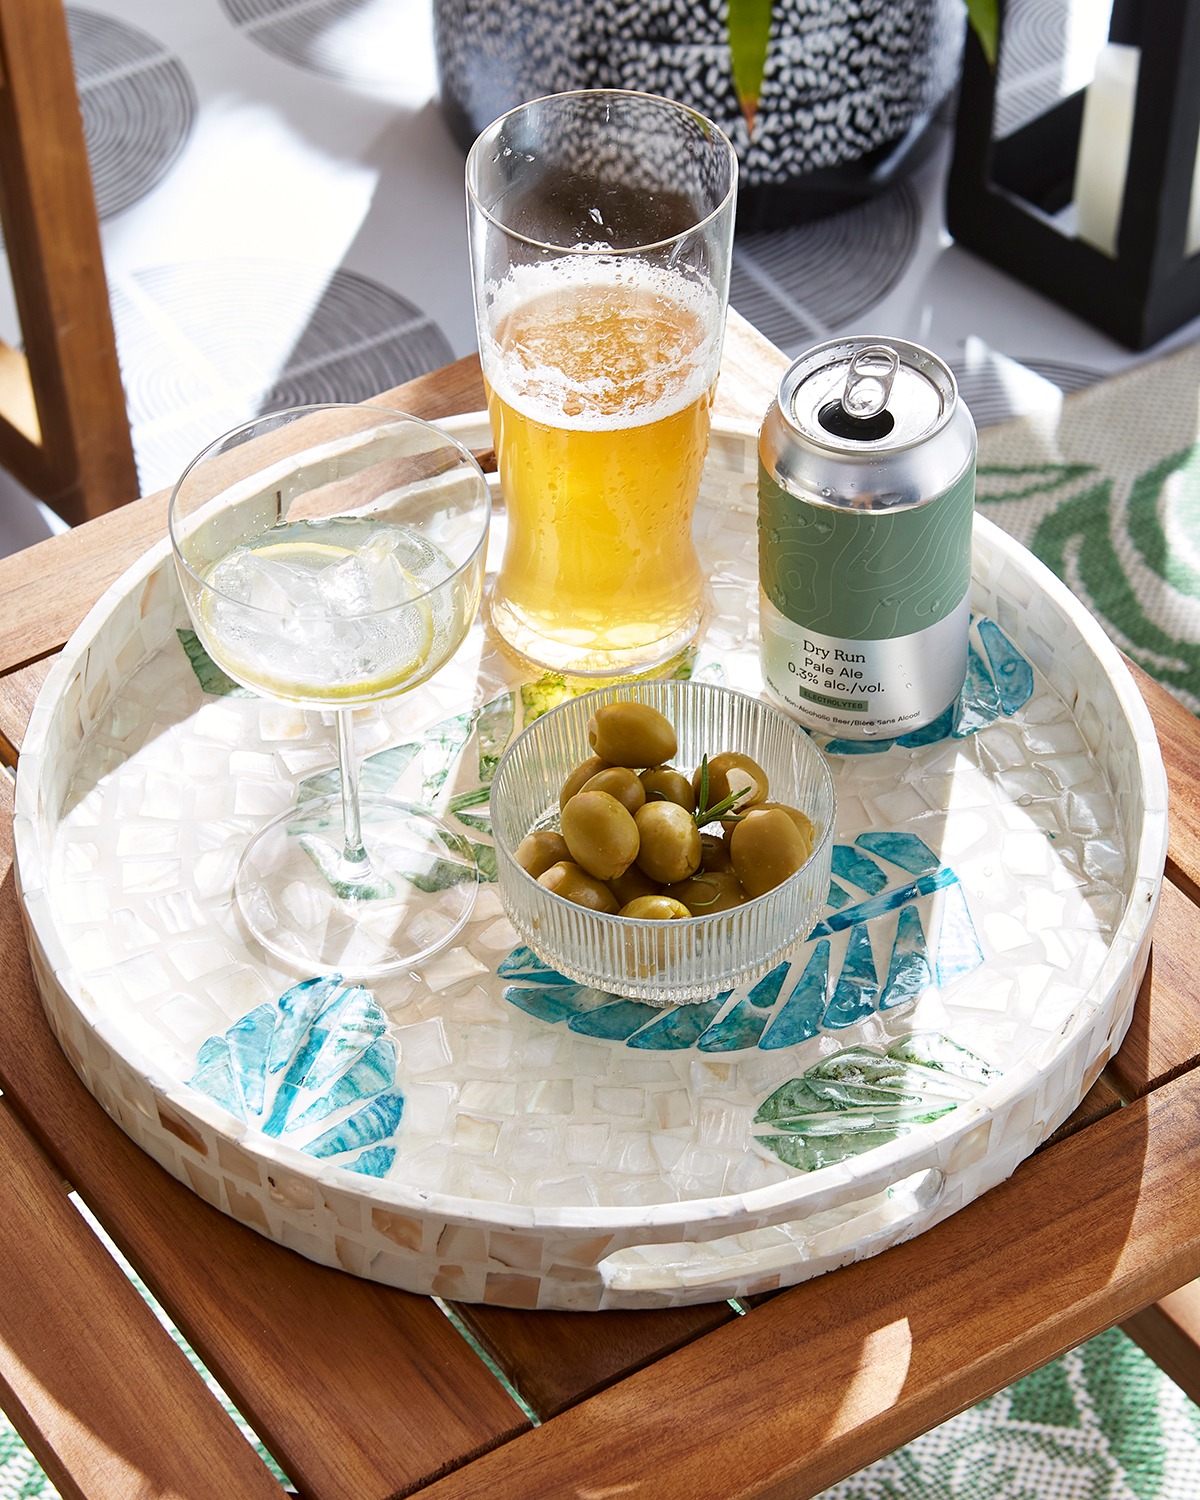 On top of a tropical themed drink tray sits olives and drink ware from HomeSense.